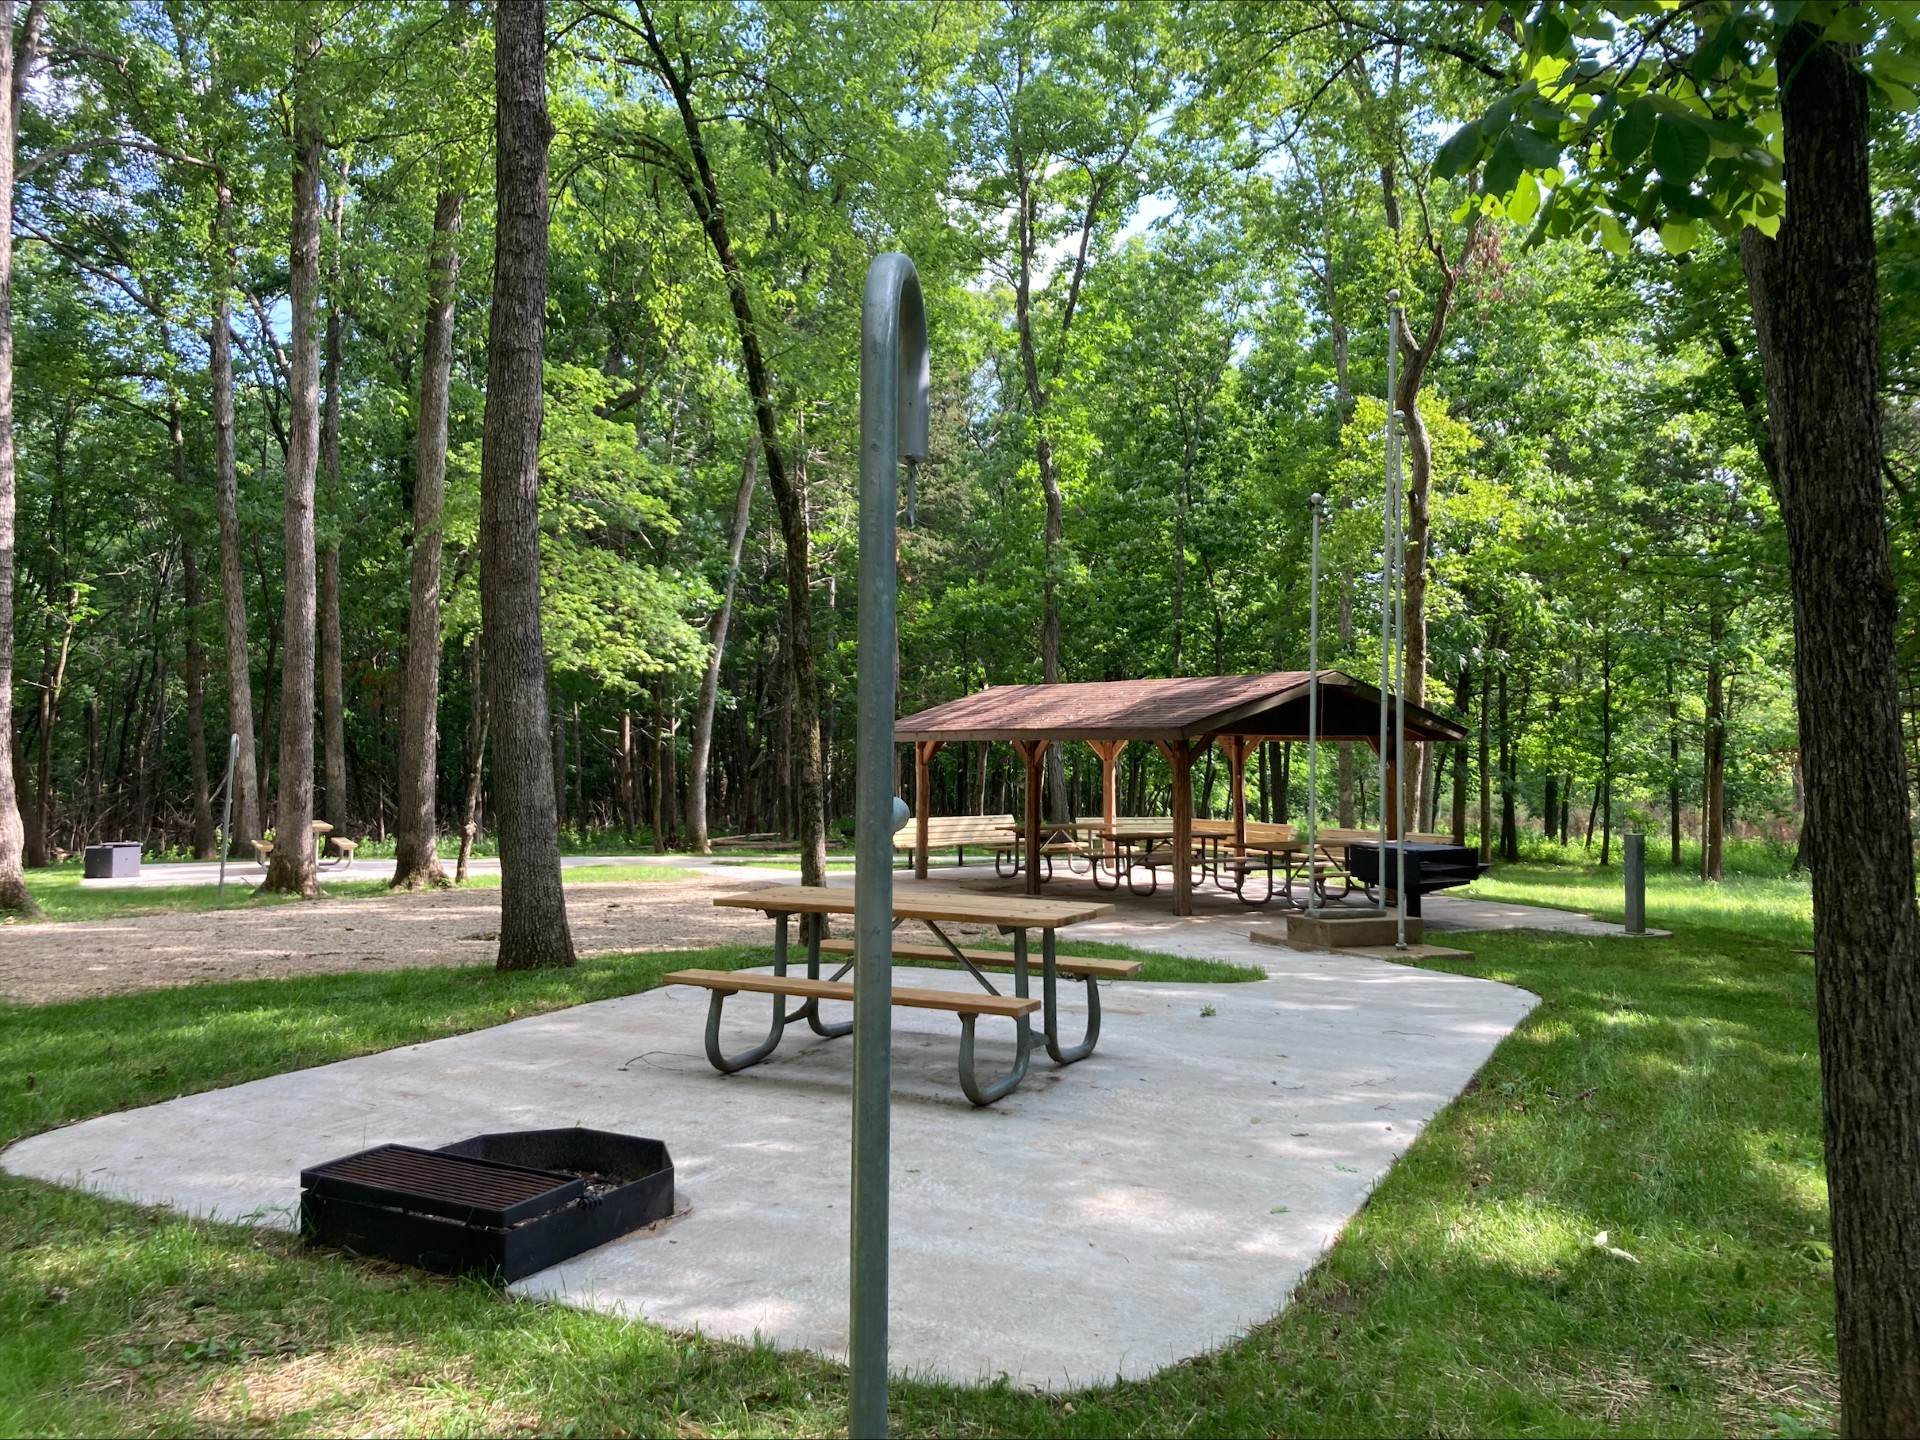 Water spigot, picnic tables, and covered meeting area